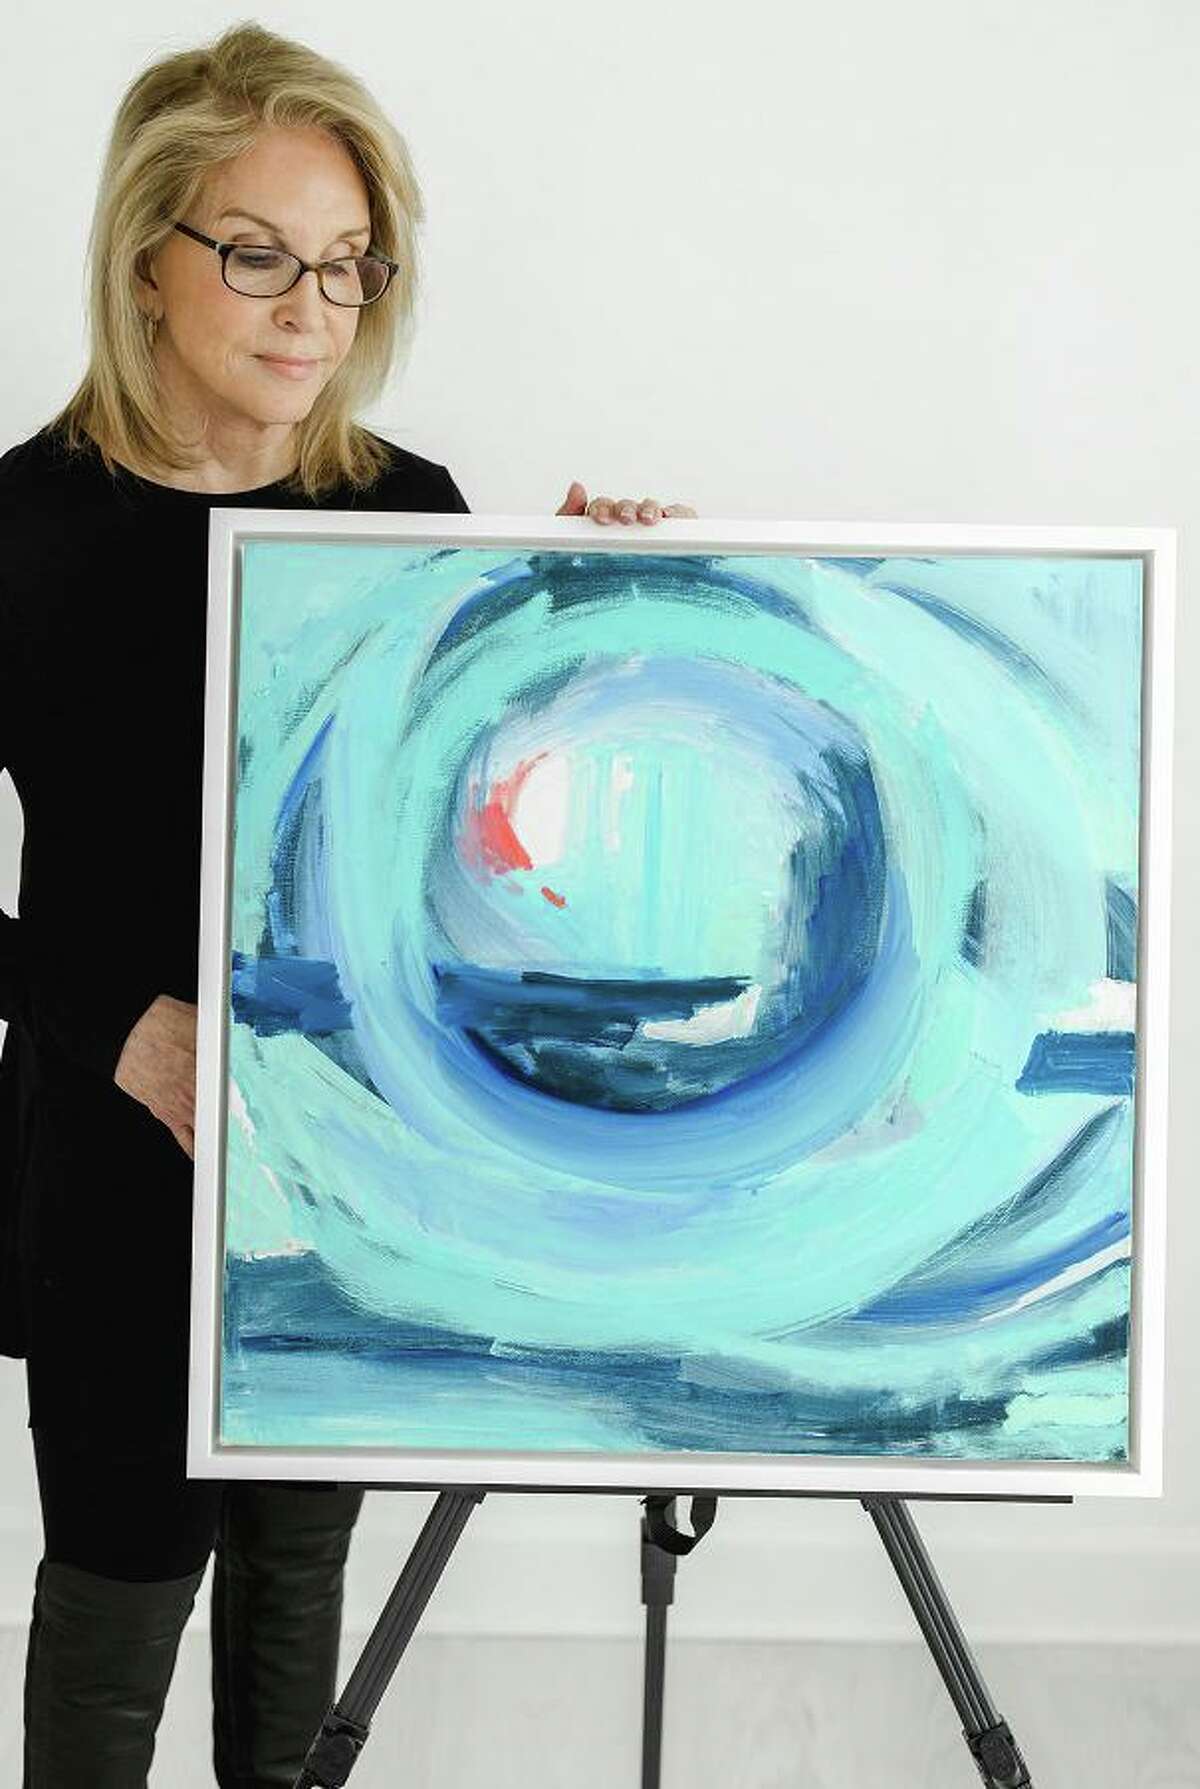 Darien artist Dana Goodfellow, shown with a piece of her artwork, will hold a solo show at the Berkshire Hathaway HomeServices in downtown Rowayton.